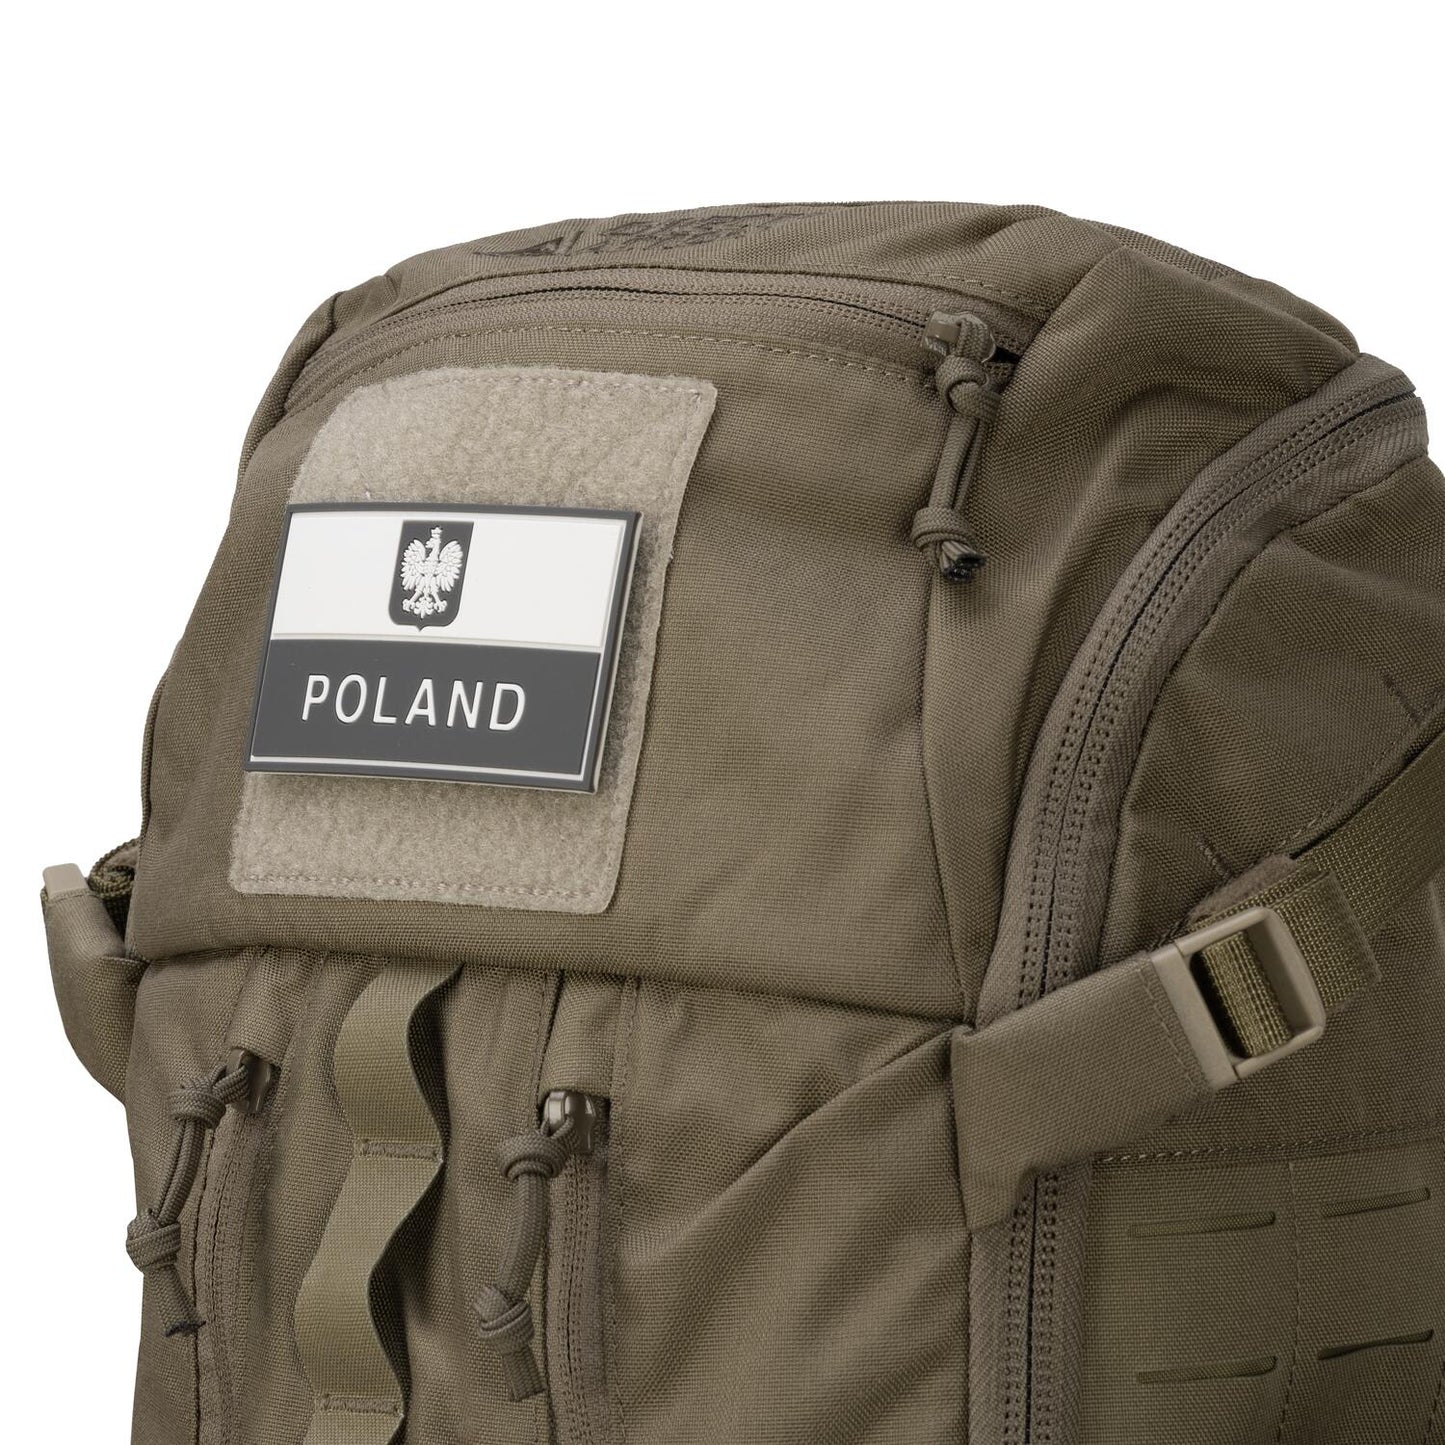 Direct Action HALIFAX® Urban-Adventure Military-Grade Backpack